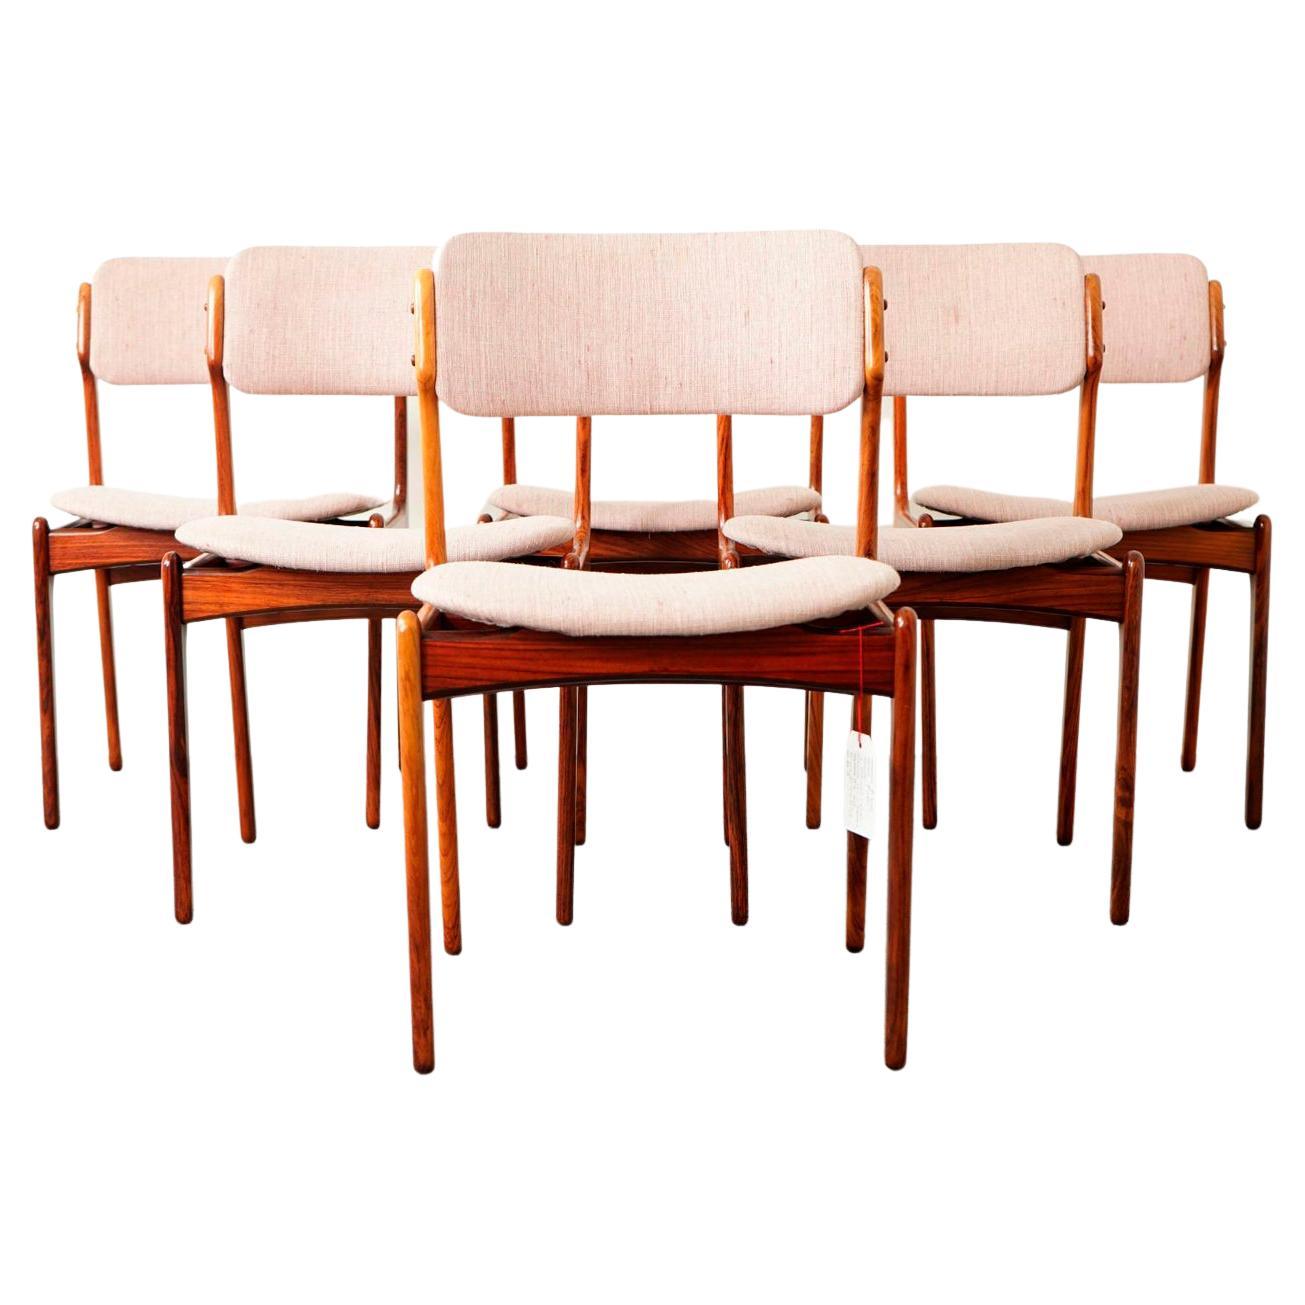 6 Danish Modern Rosewood Dining Chairs Model 49 by Erik Buch